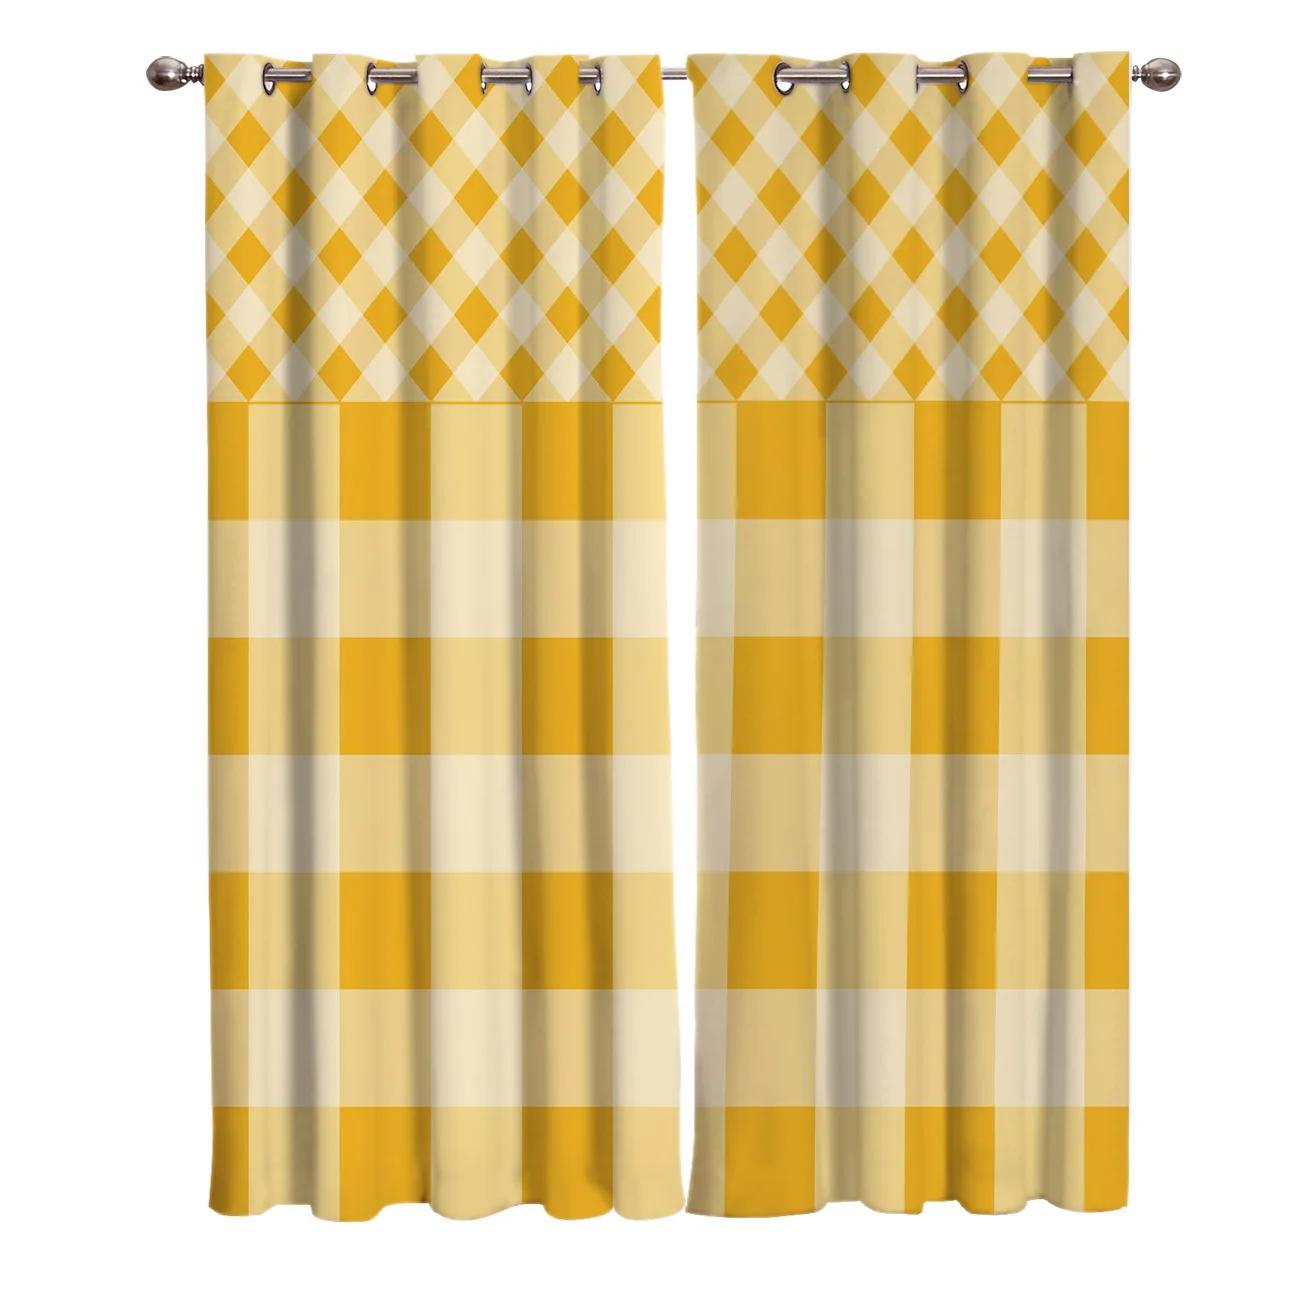 Yellow Check Stripe Square Stitching Room Curtains Large Window